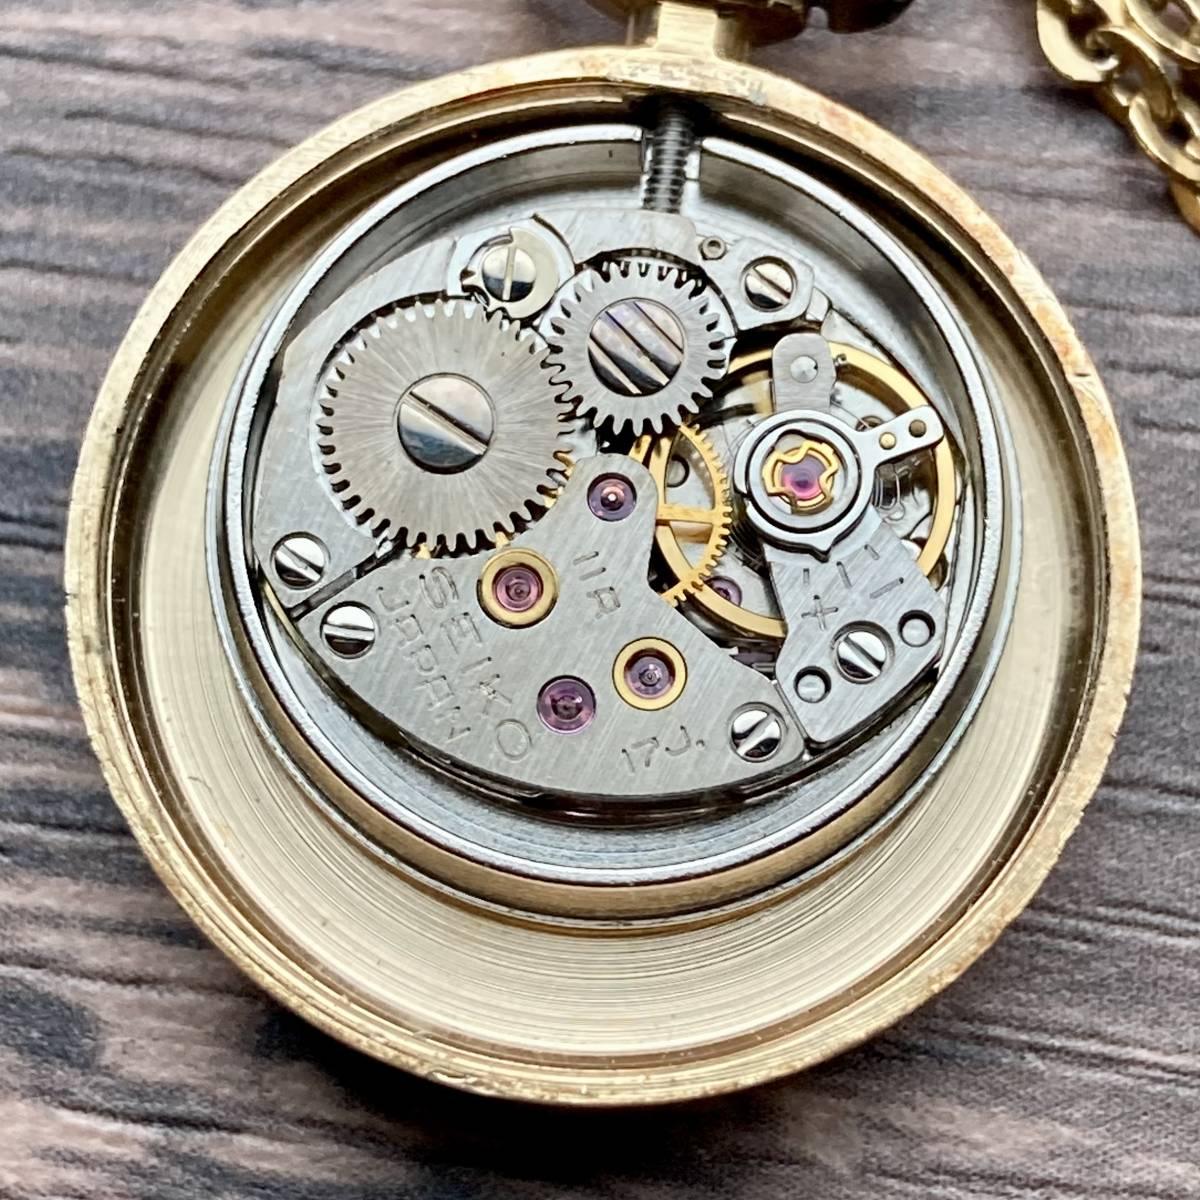 Seiko Pocket Watch 1965 23mm Pendant Watch Vintage with Chain - Murphy Johnson Watches Co.